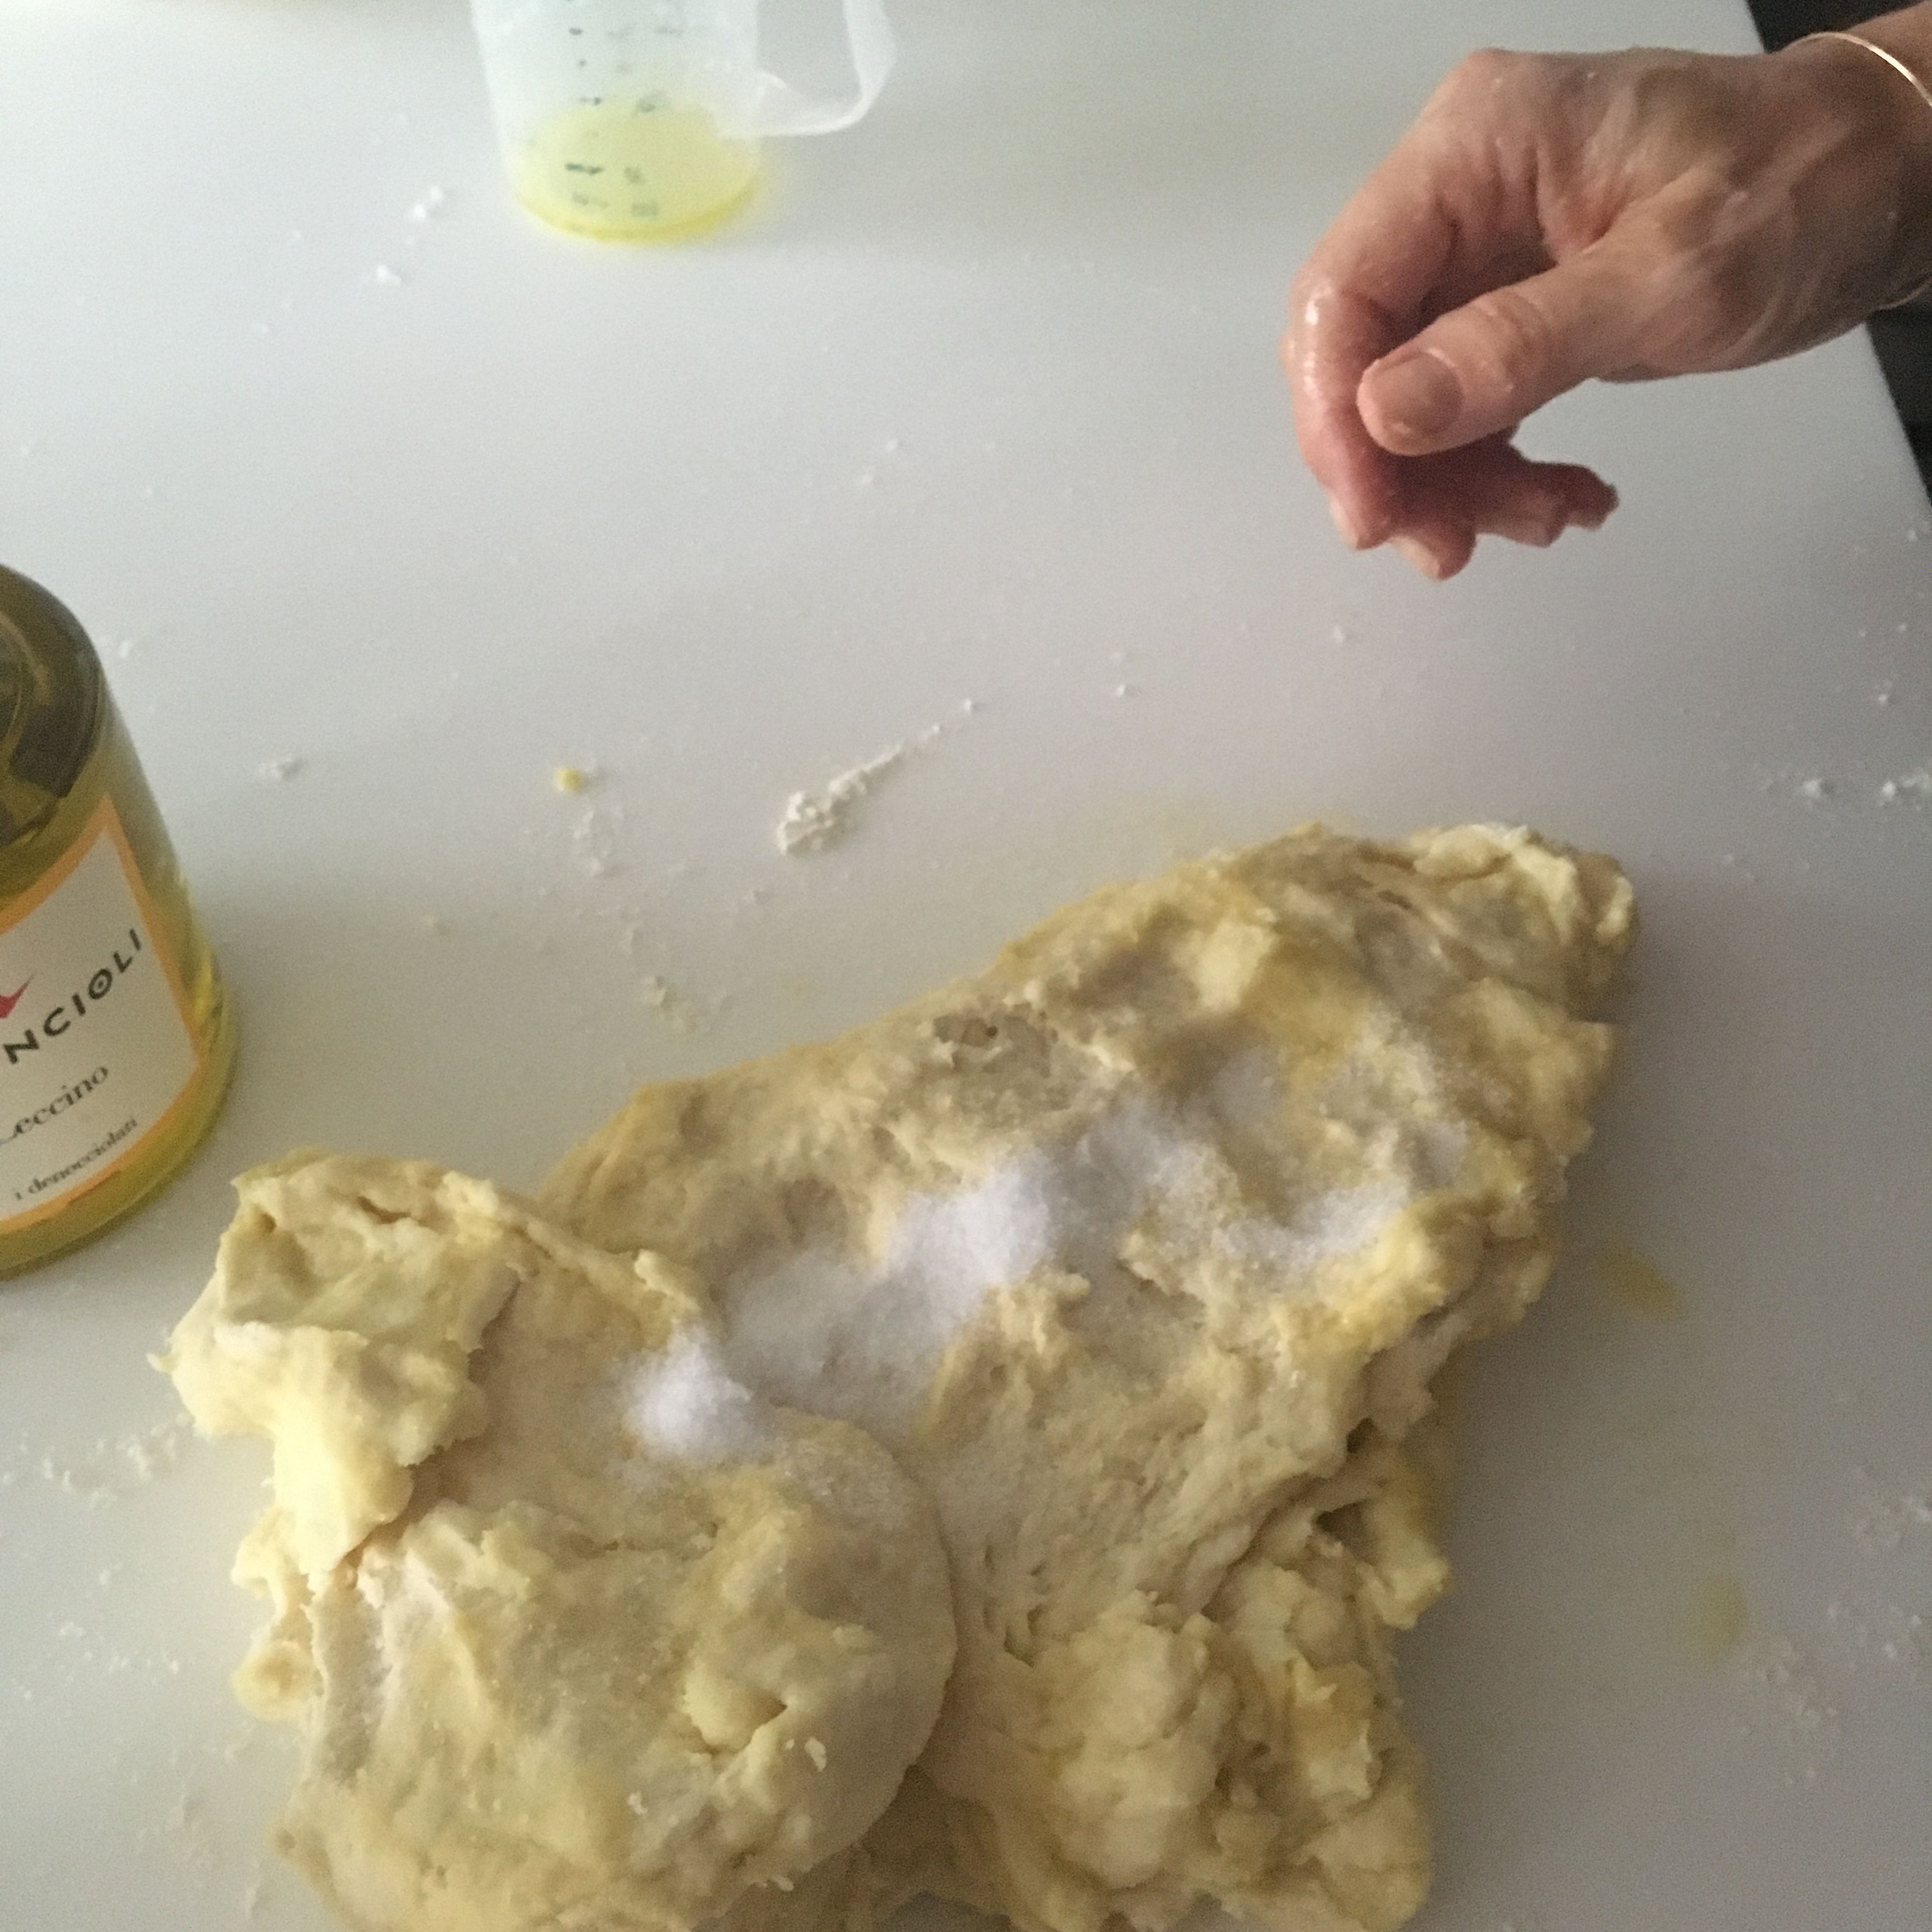 Flatten the dough out and add salt to it